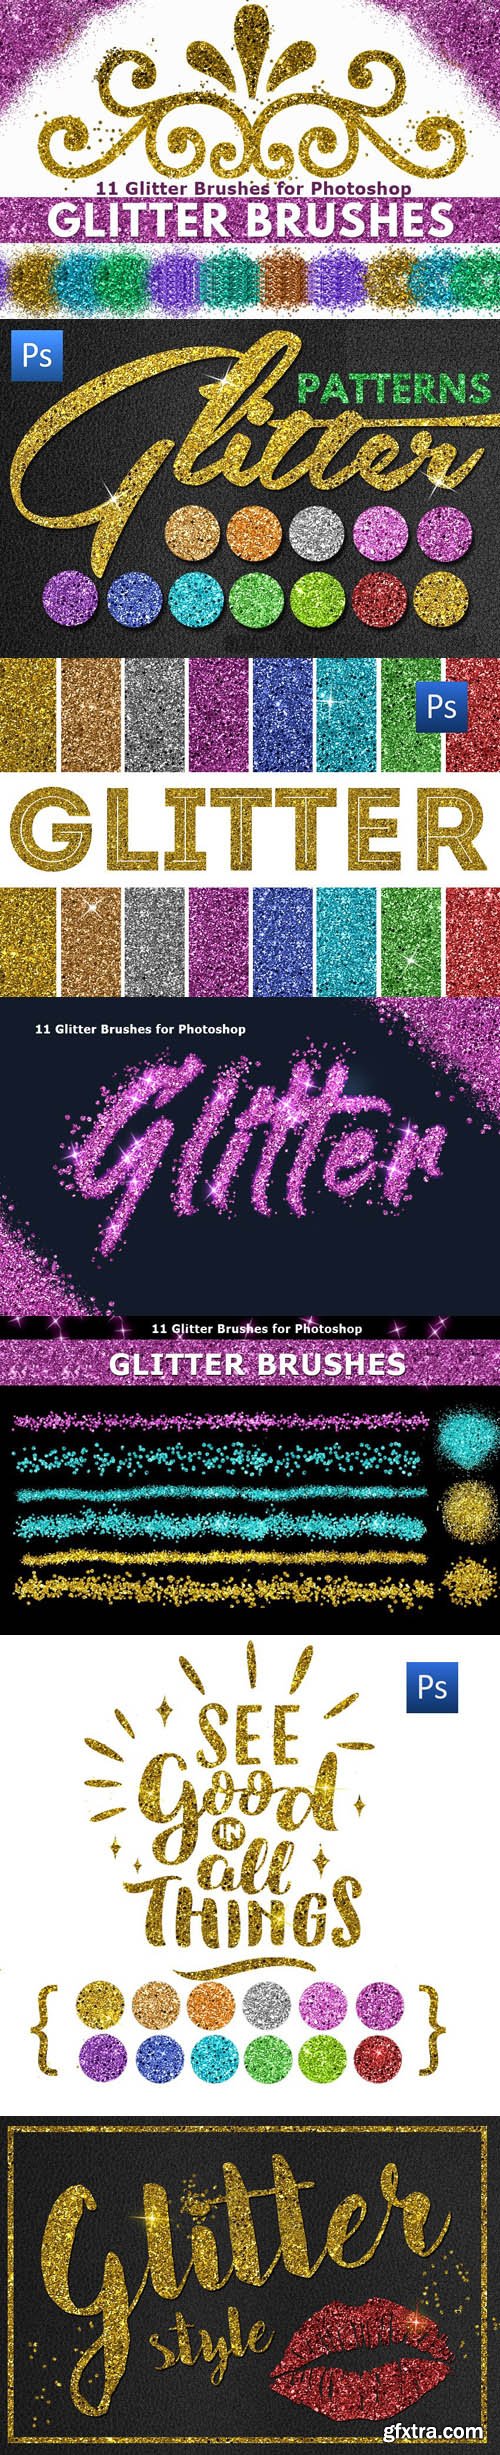 Seamless Glitter - Photoshop Brushes & Patterns Collection